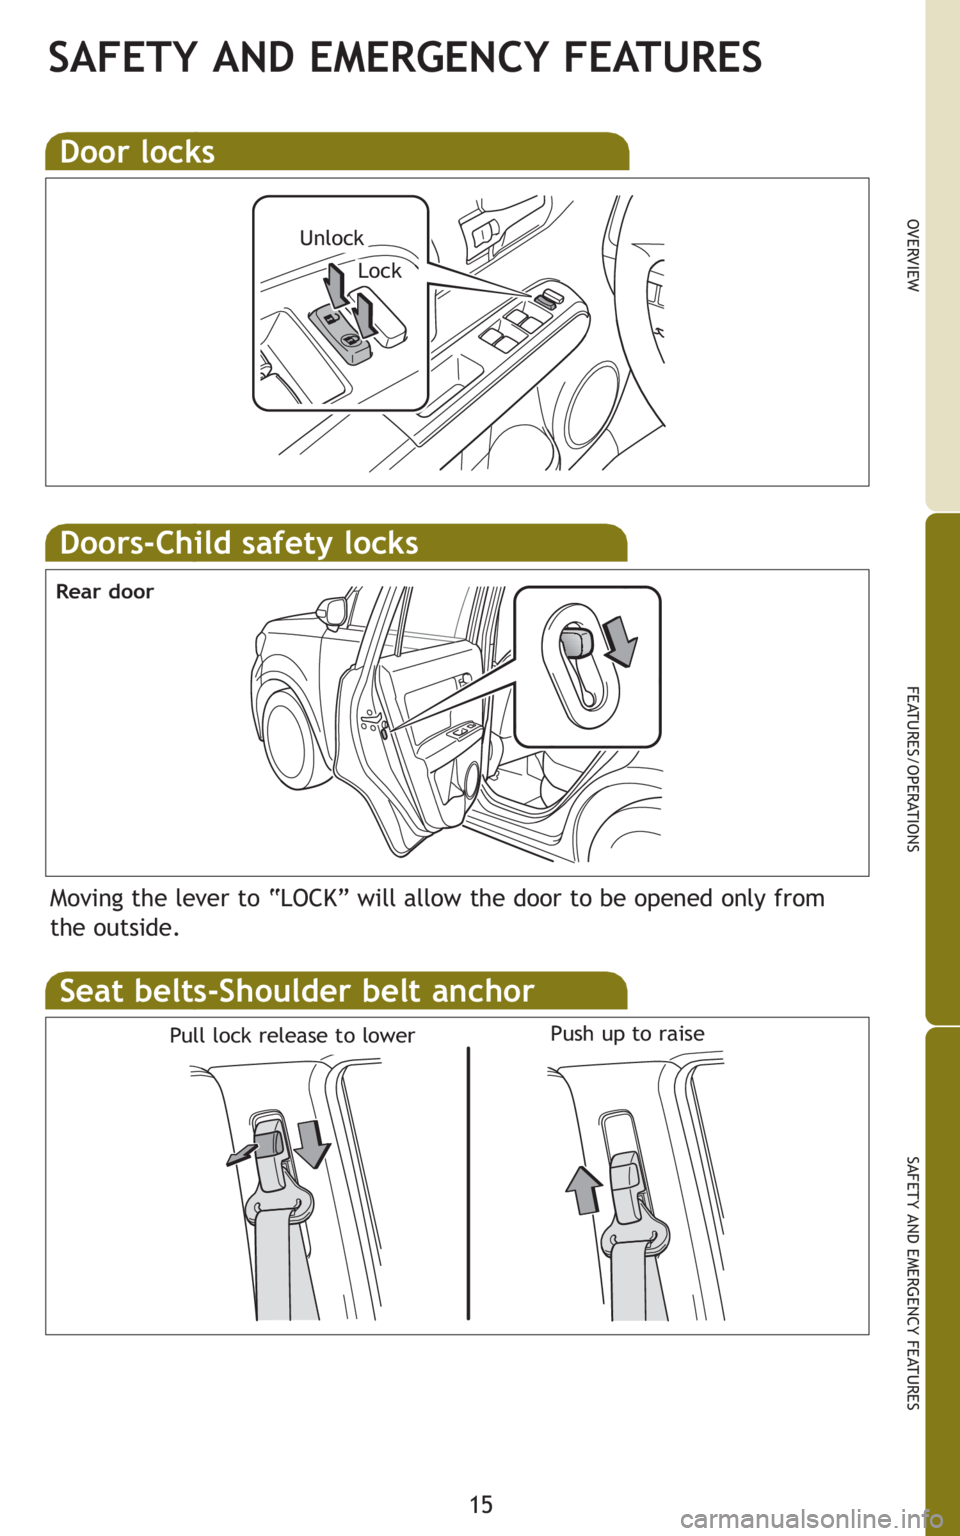 TOYOTA xB 2011   (in English) User Guide 15
OVERVIEW
FEATURES/OPERATIONS
SAFETY AND EMERGENCY FEATURES
SAFETY AND EMERGENCY FEATURES
Doors-Child safety locks
Moving the lever to “LOCK” will allow the door to be opened only from 
the outs